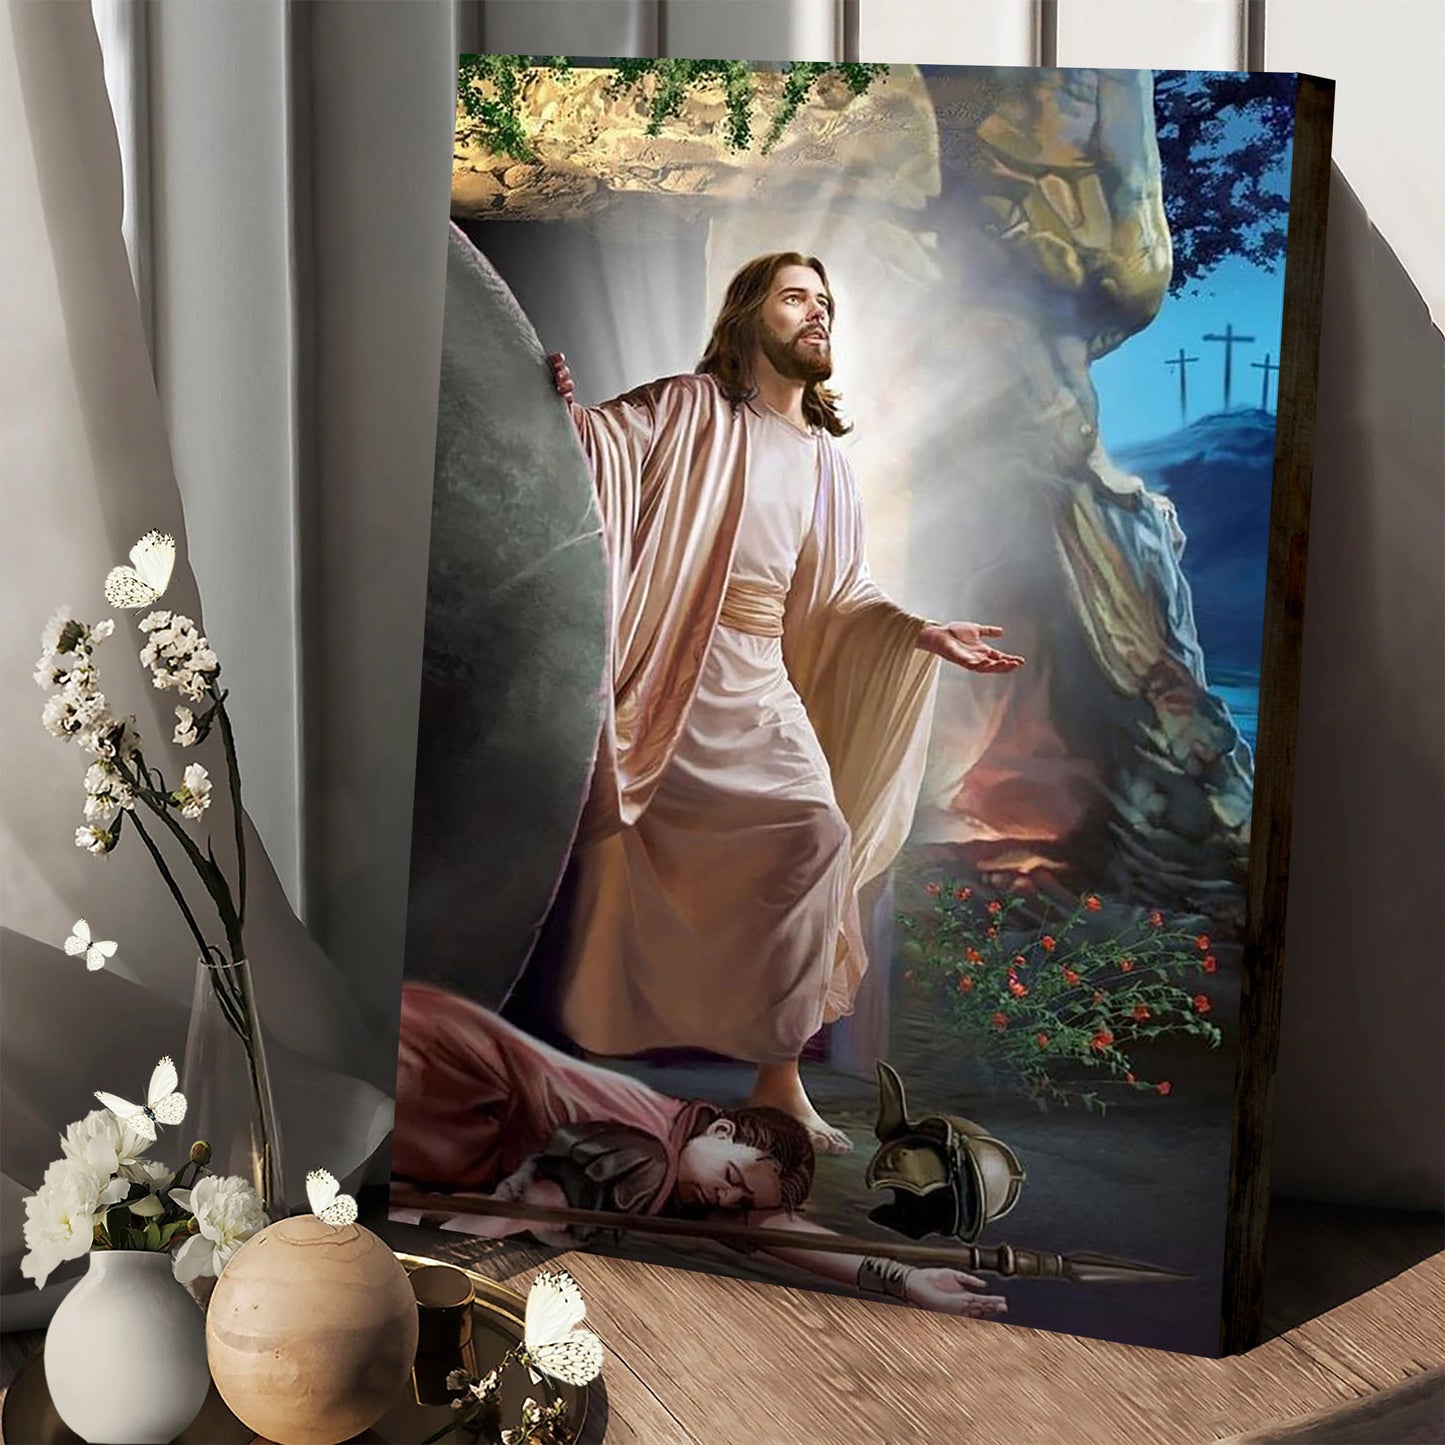 Jesus Coming Out Of The Tomb Canvas Prints - Jesus Christ Art - Christian Canvas Wall Decor